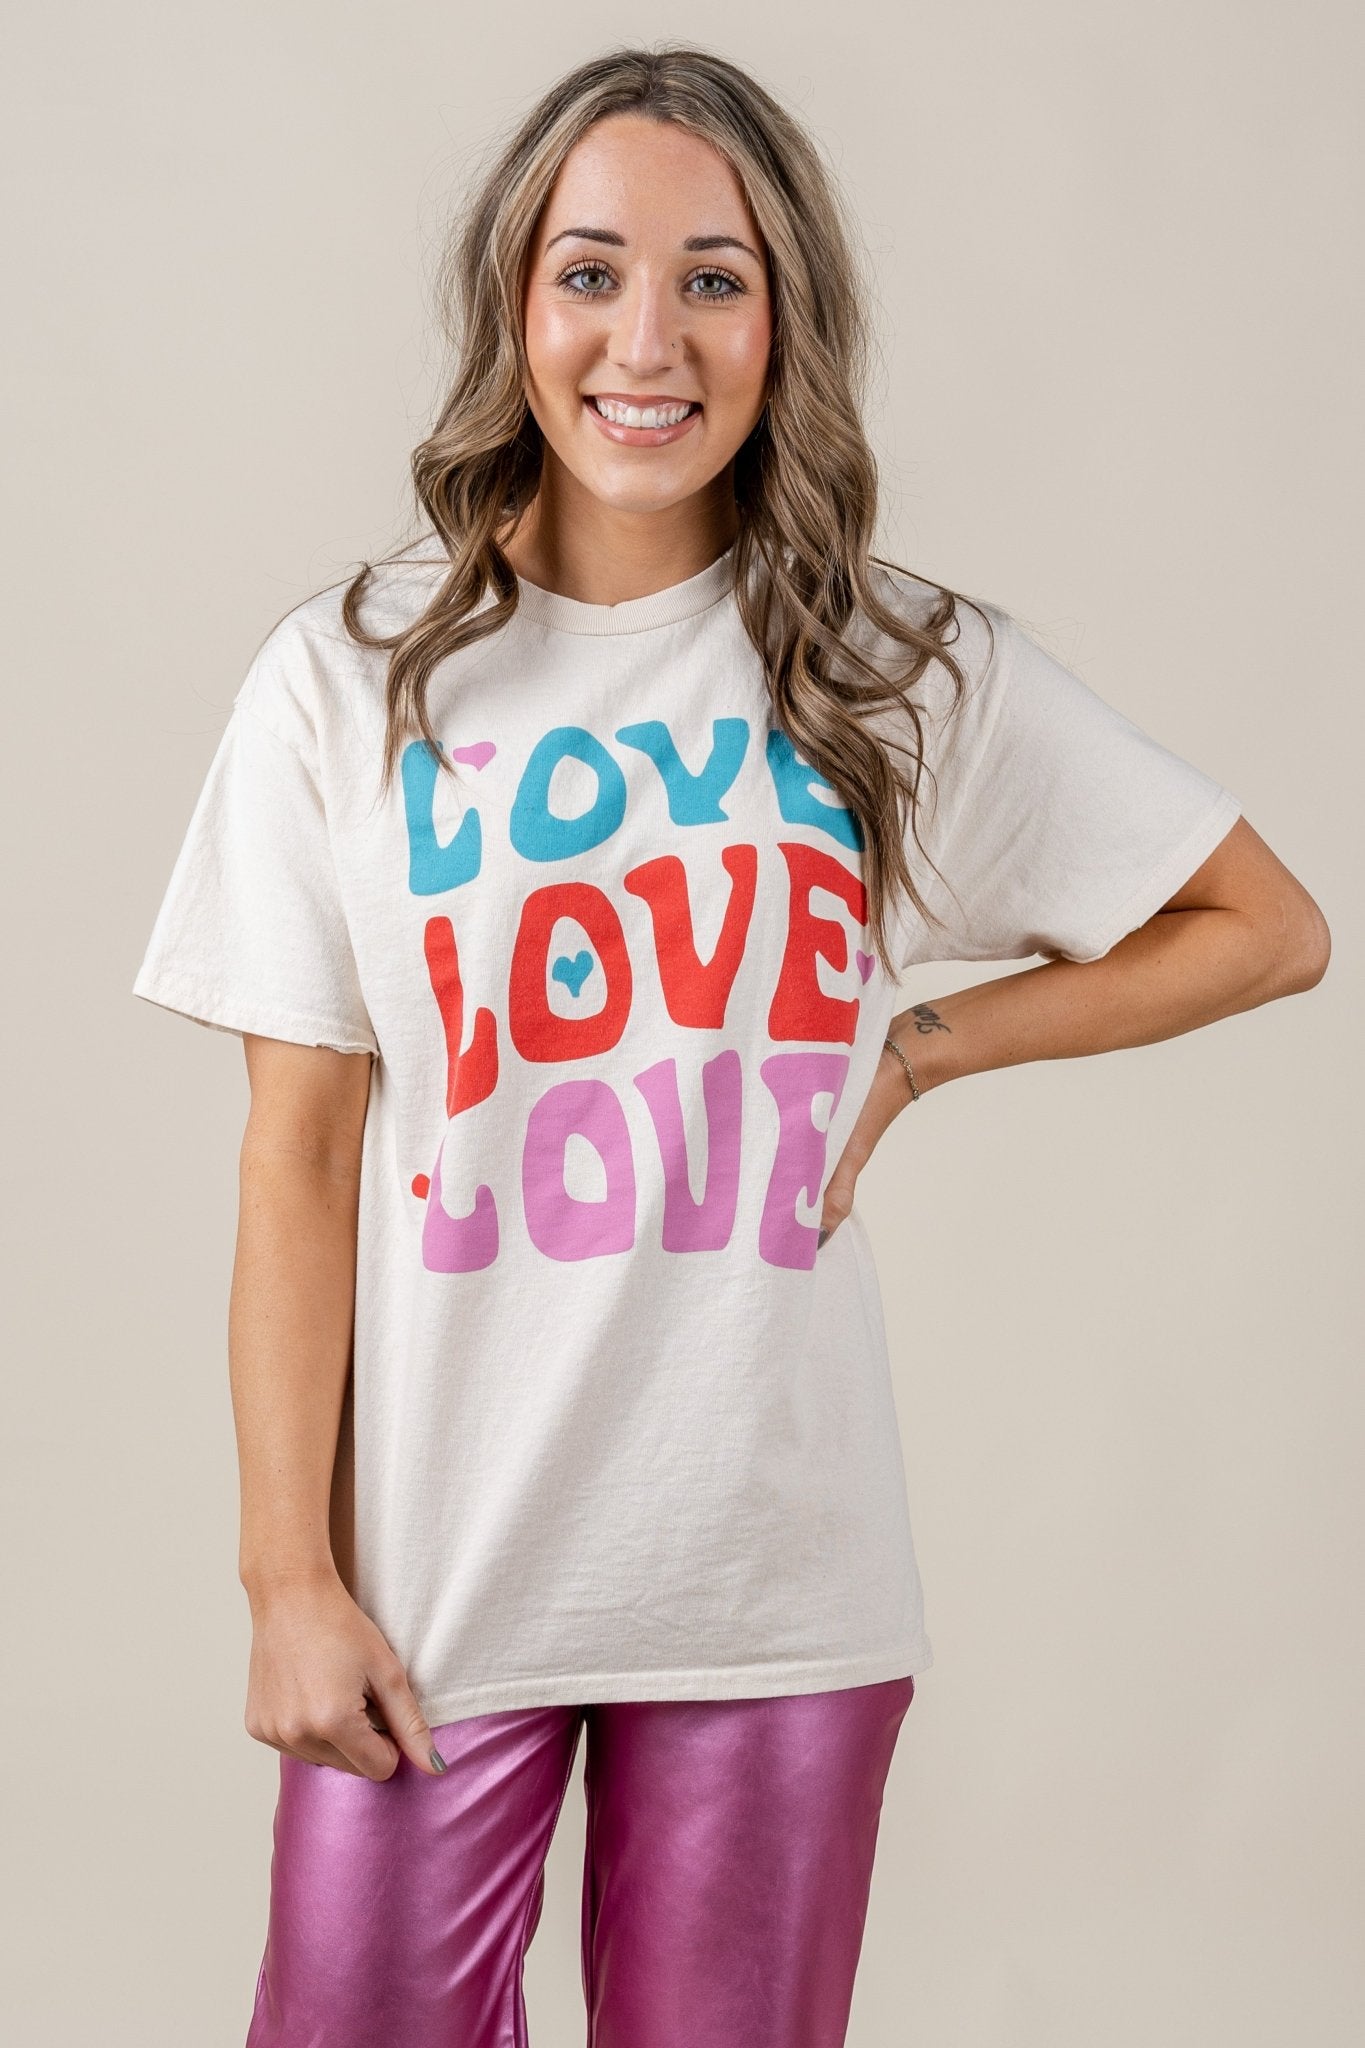 Love repeat thrifted t-shirt off white - Trendy Valentine's T-Shirts at Lush Fashion Lounge Boutique in Oklahoma City